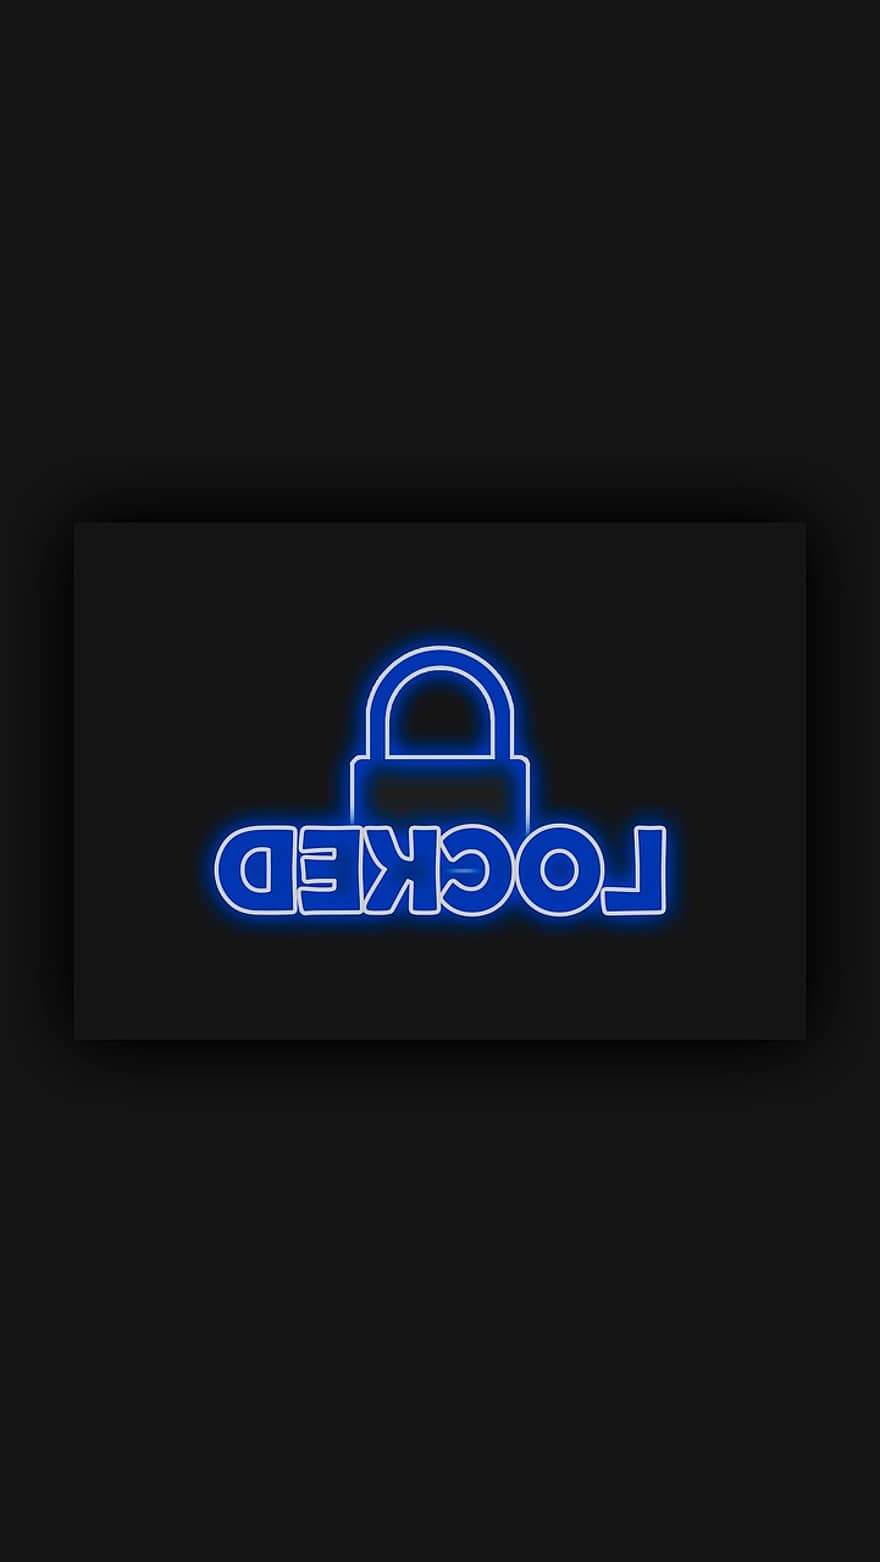 Locked, Sign, Symbol, Security, Background, Phone, Wallpaper, Smartphone, Safety, Closed, padlock